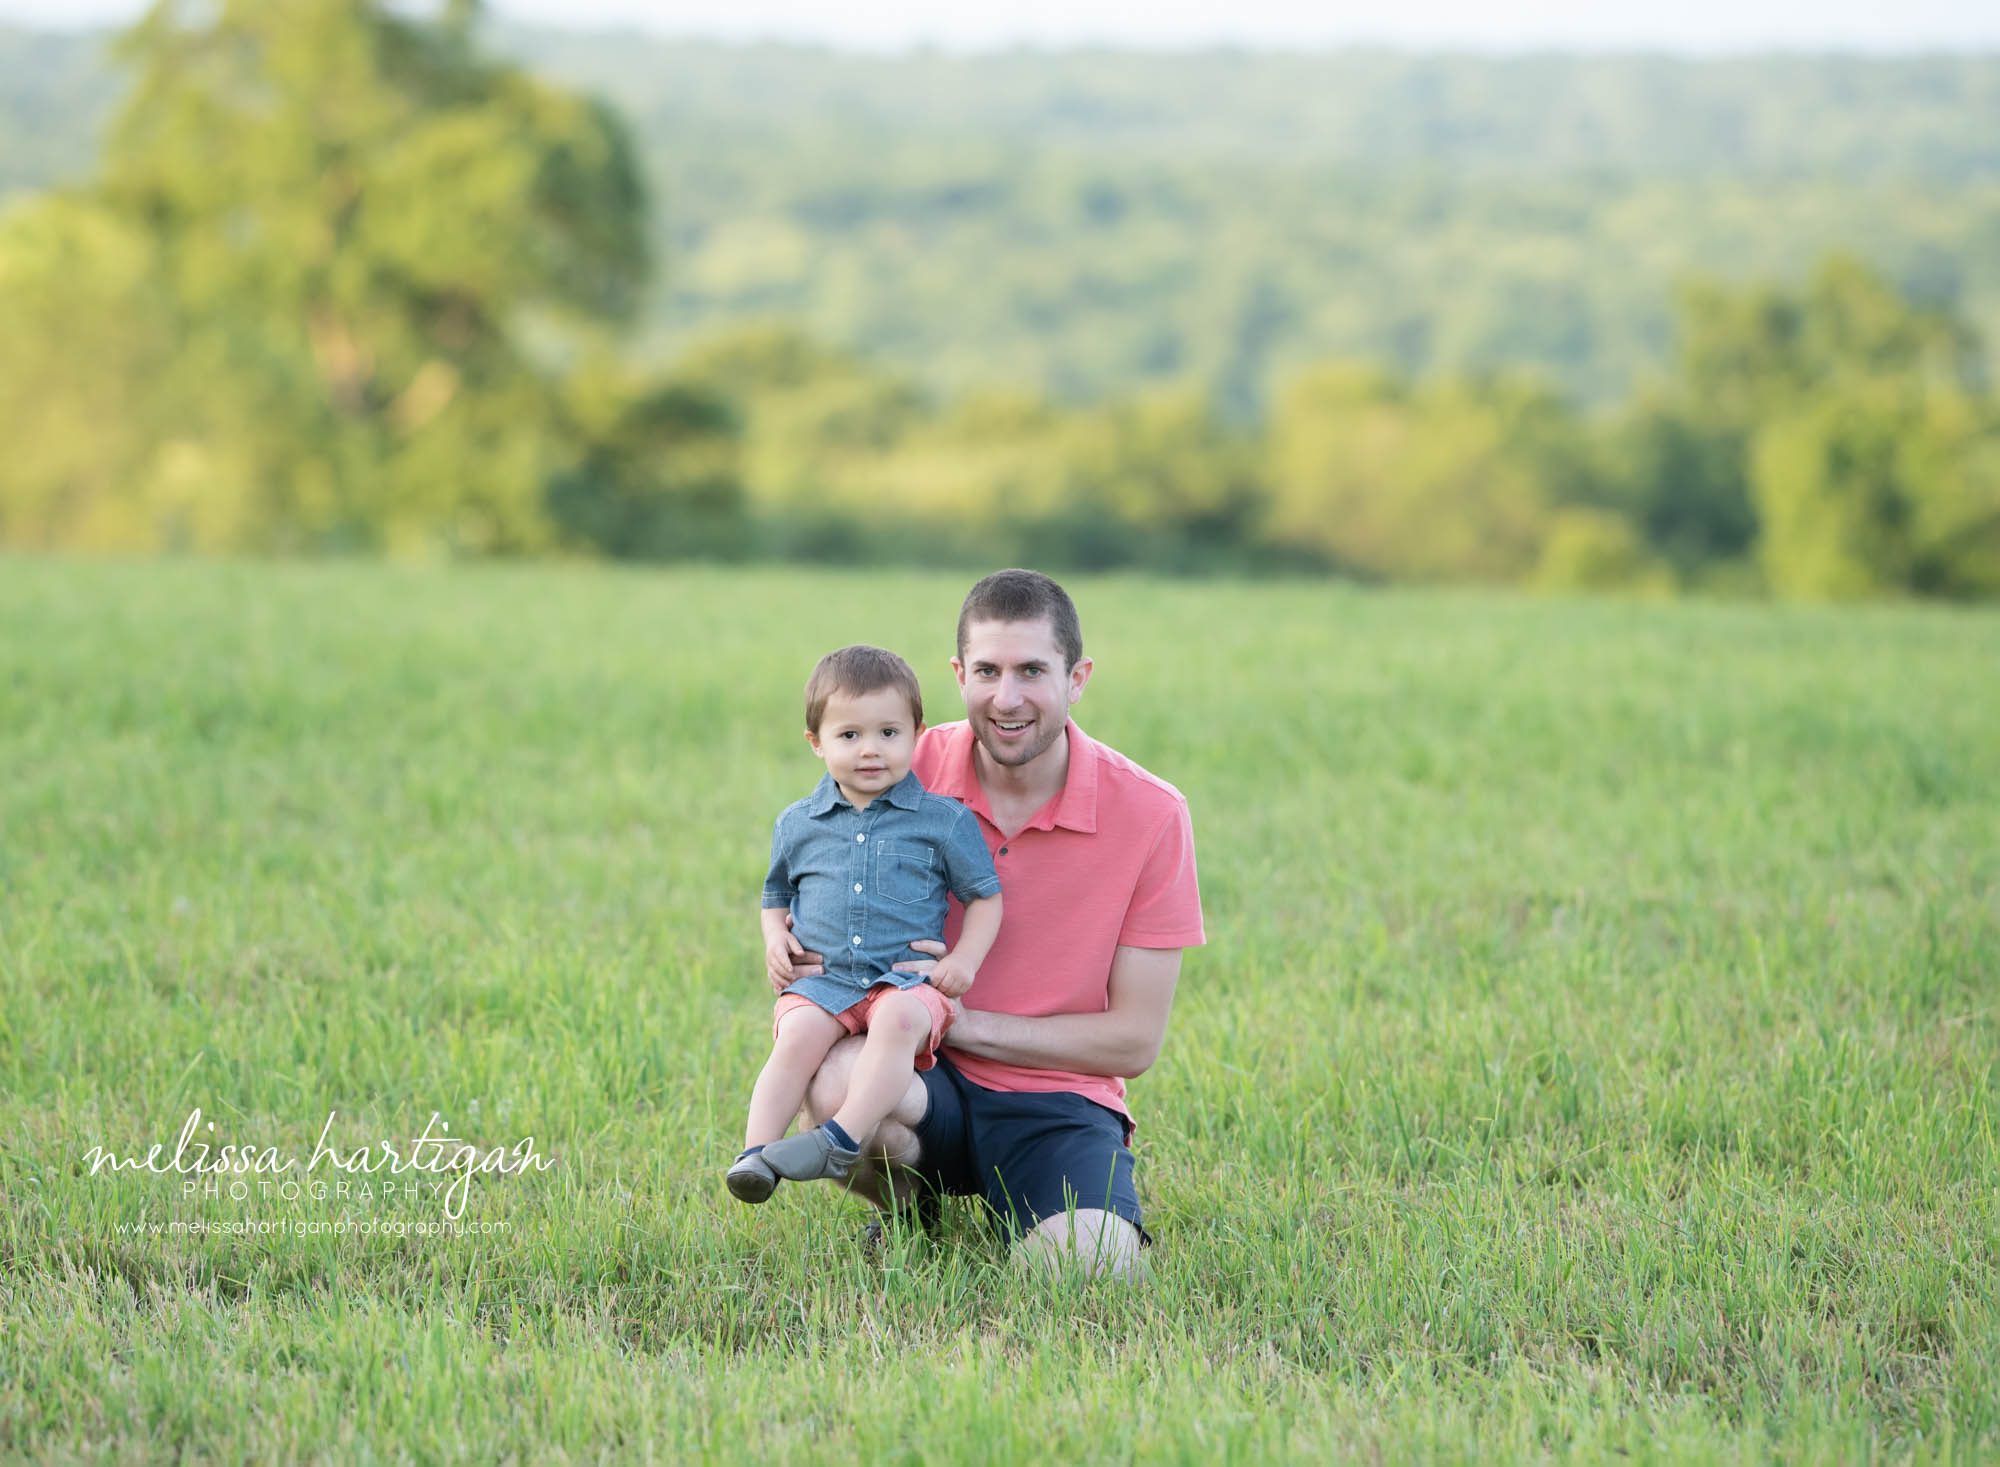 dad with son kneeling in grass outdoor family photography CT